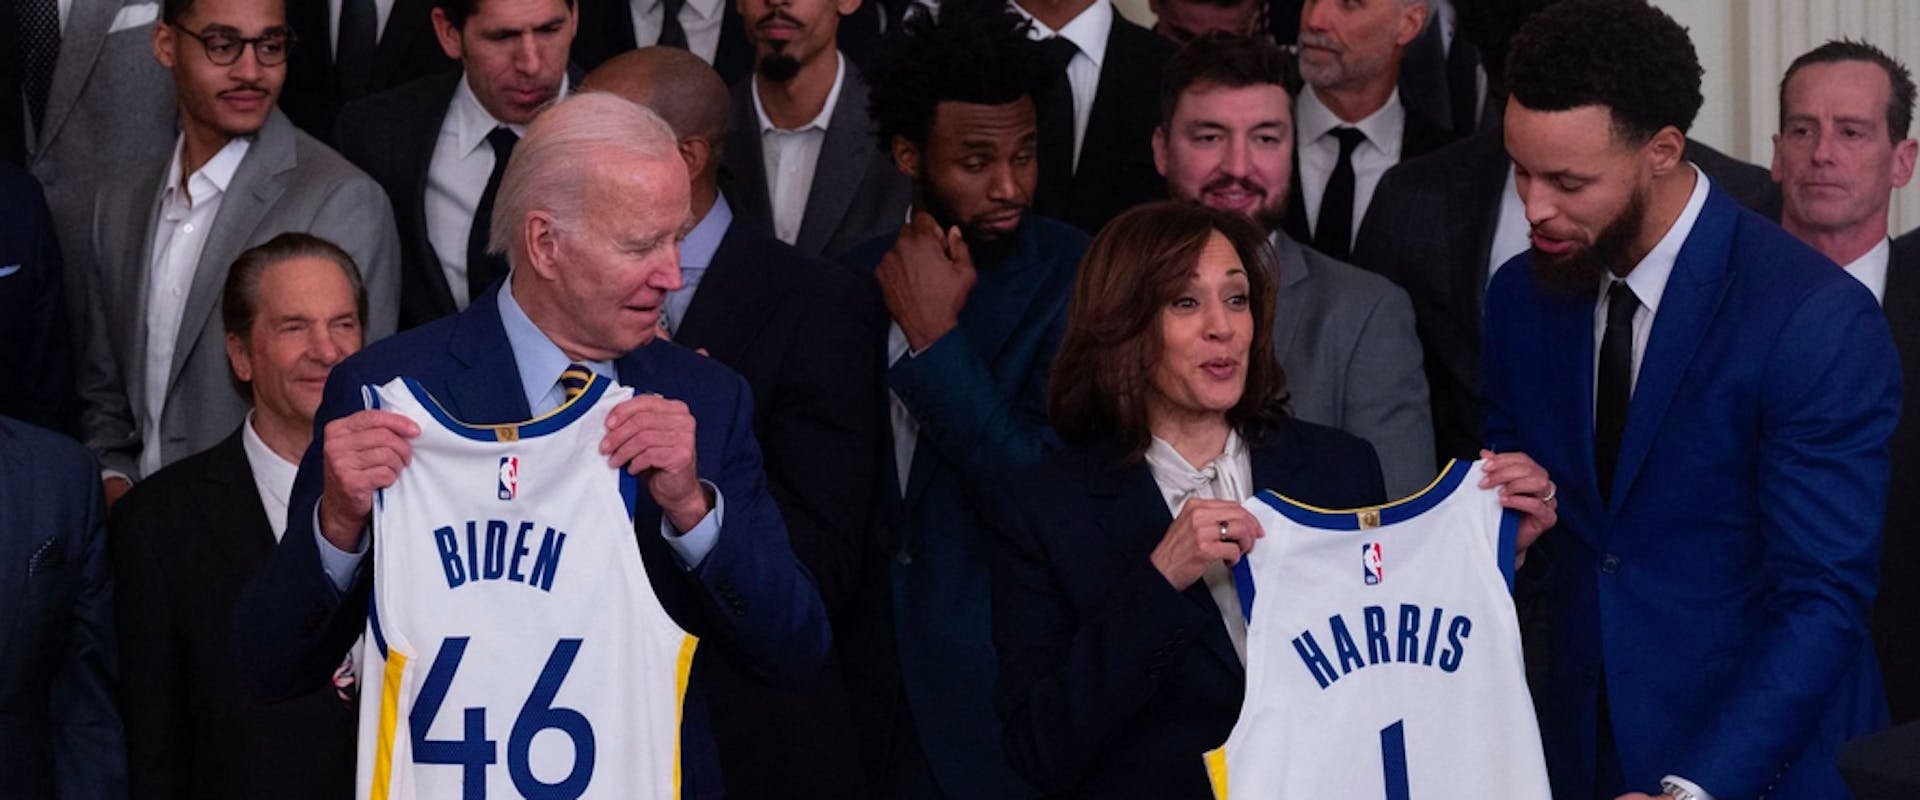 E-40, Too $hort, Sway, and Mistah F.A.B. Visit the White House With the Golden  State Warriors